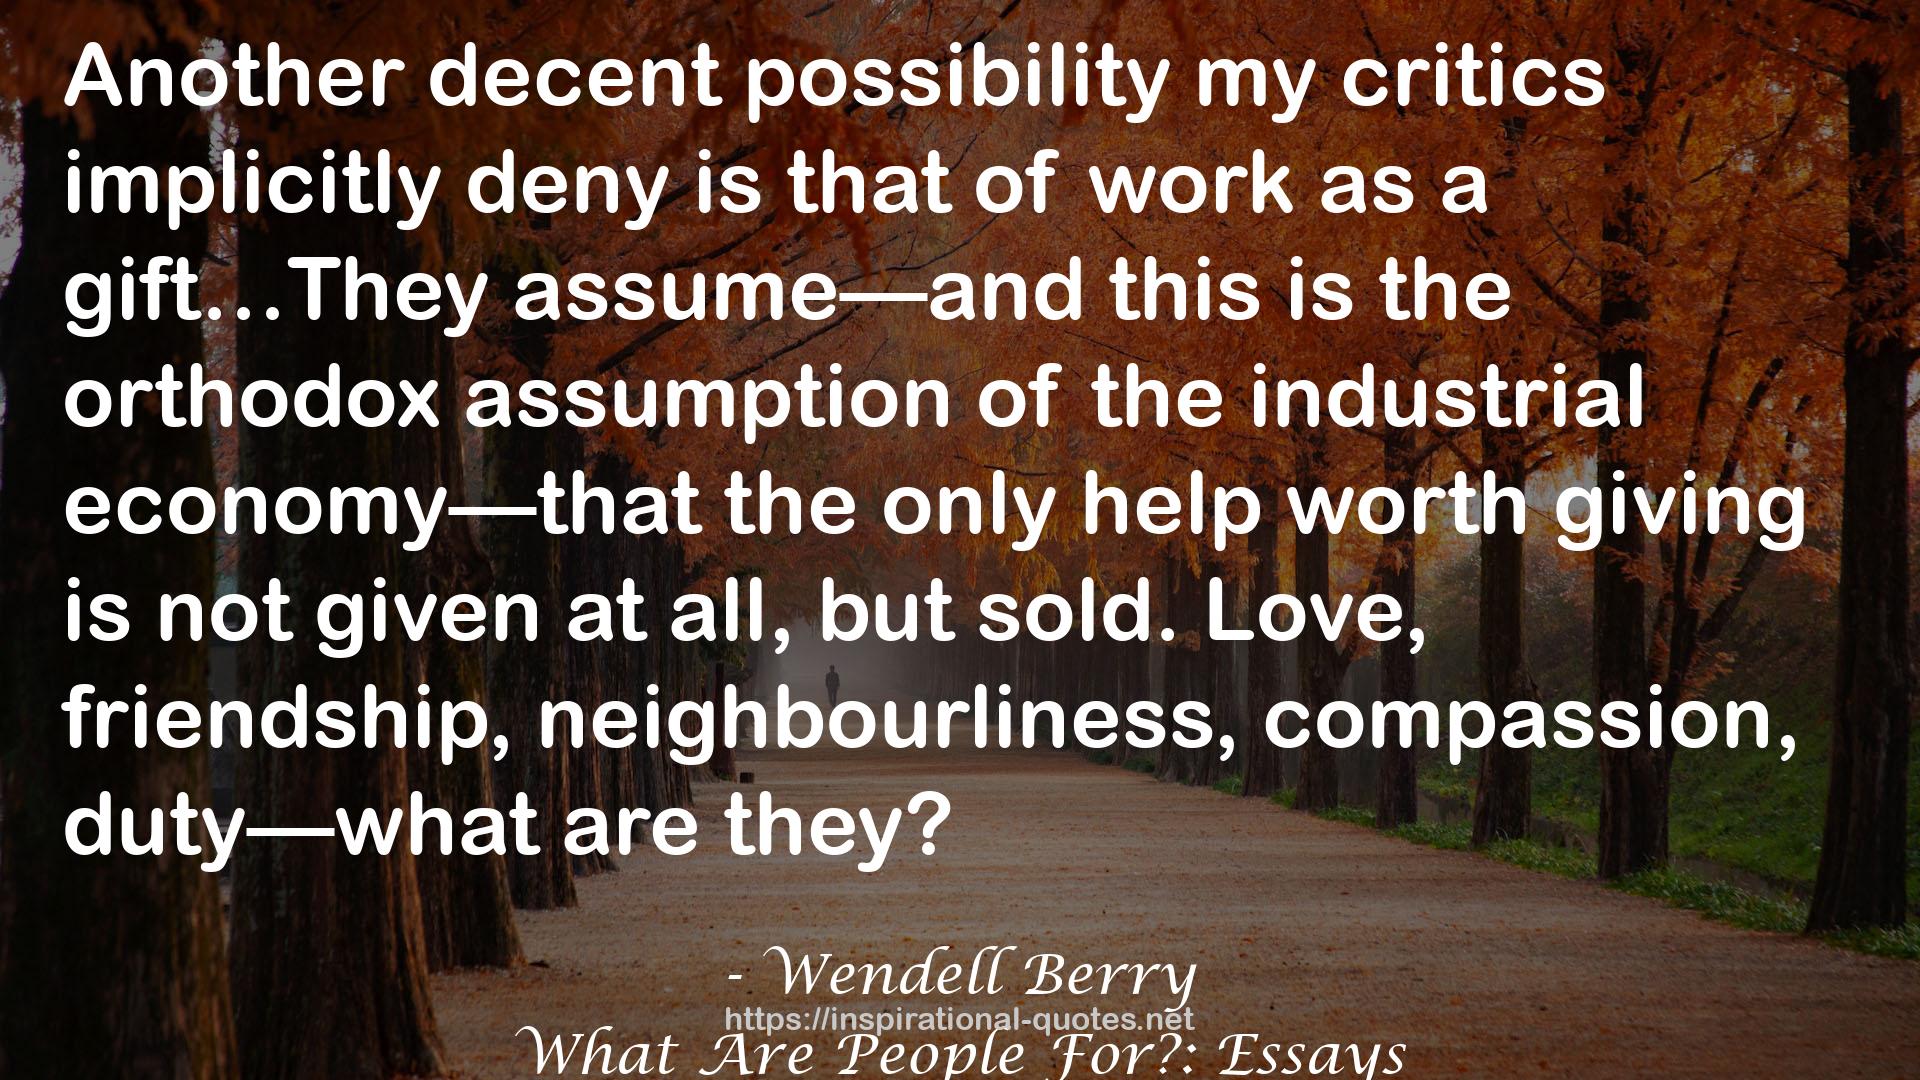 Wendell Berry QUOTES